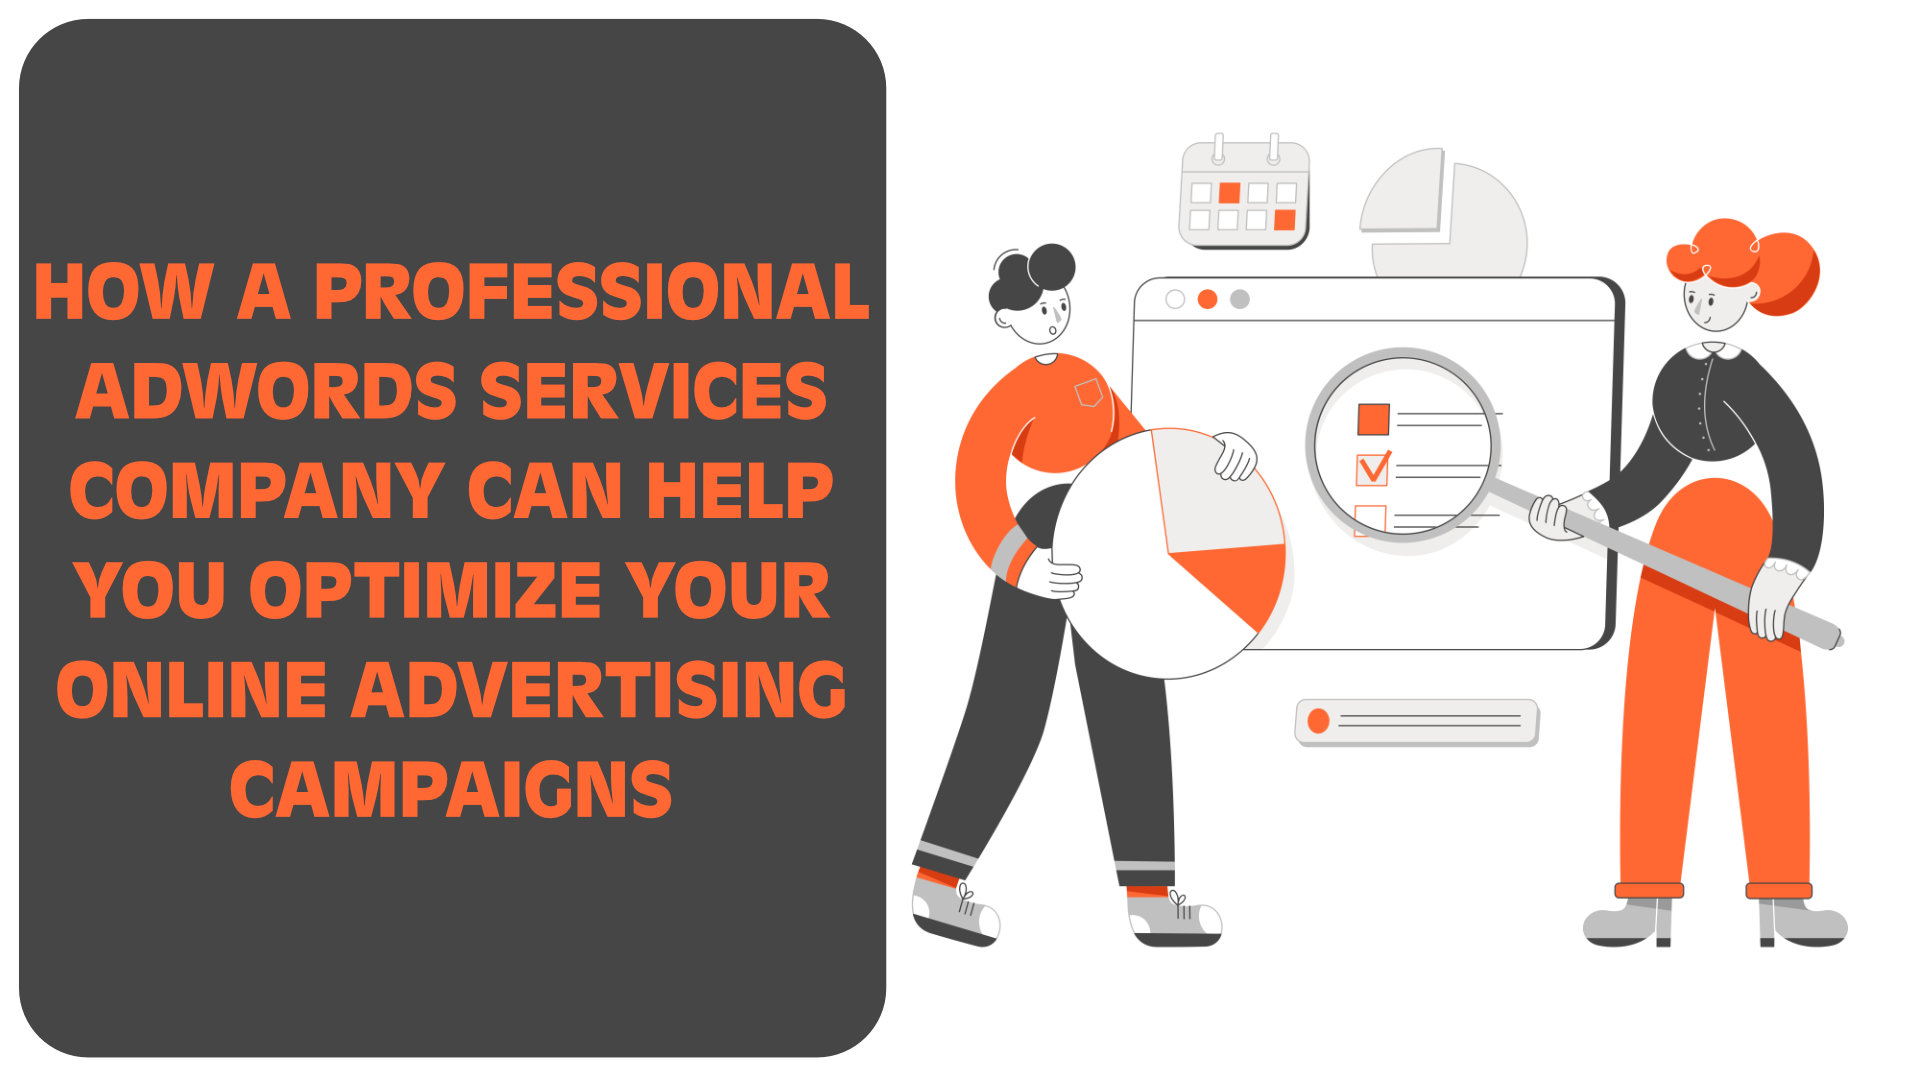 PROFESSIONAL ADWORDS SERVICES COMPANY CAN HELP YOU OPTIMIZE YOUR ADWORDS ADVERTISING CAMPAIGNS